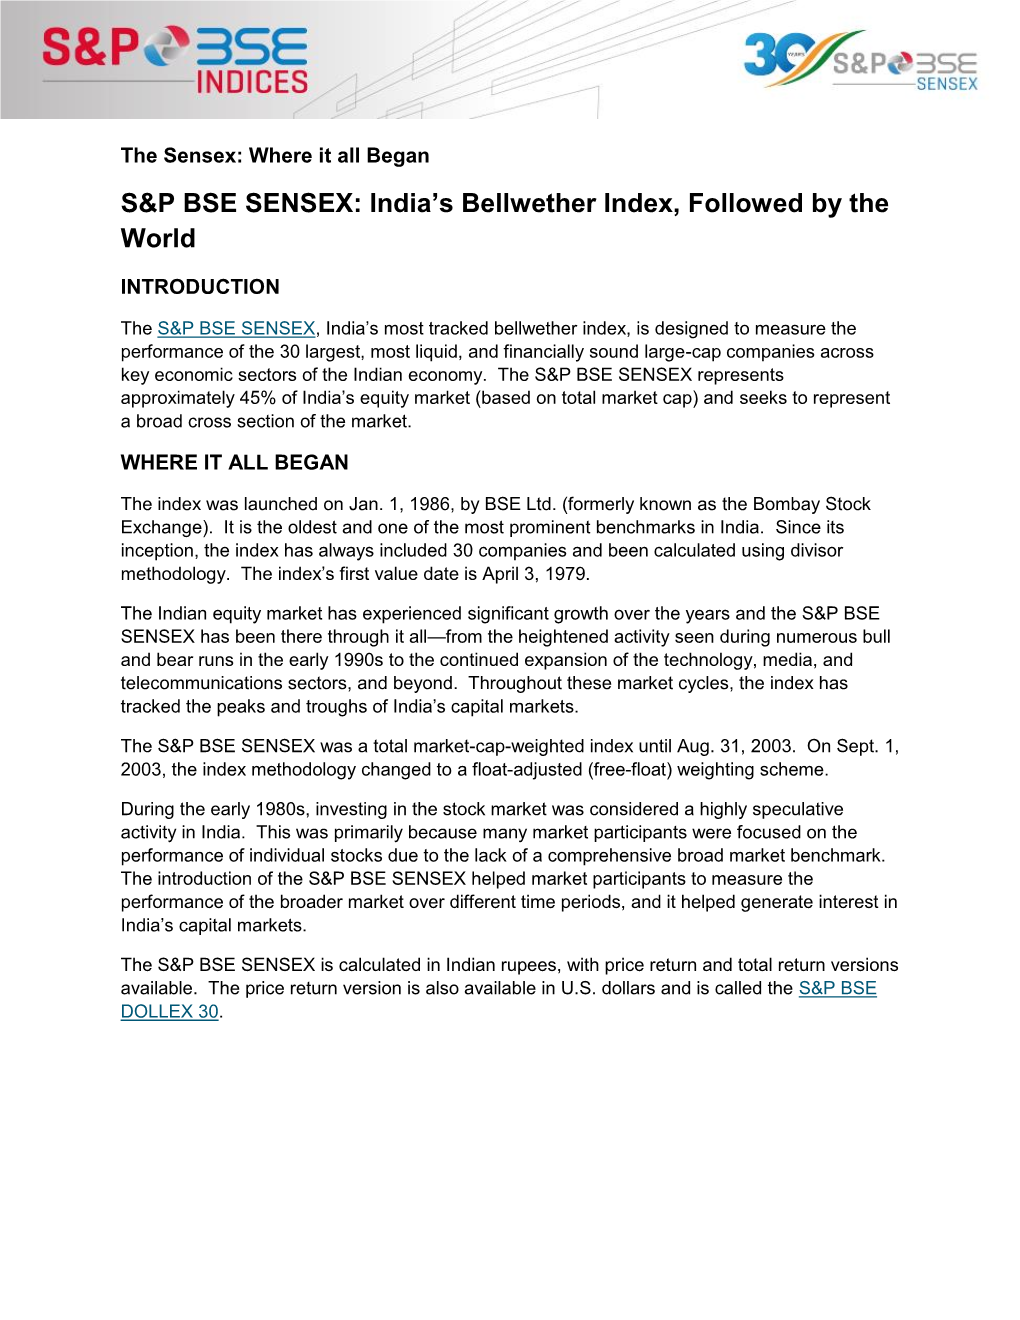 S&P BSE SENSEX: India's Bellwether Index, Followed by the World